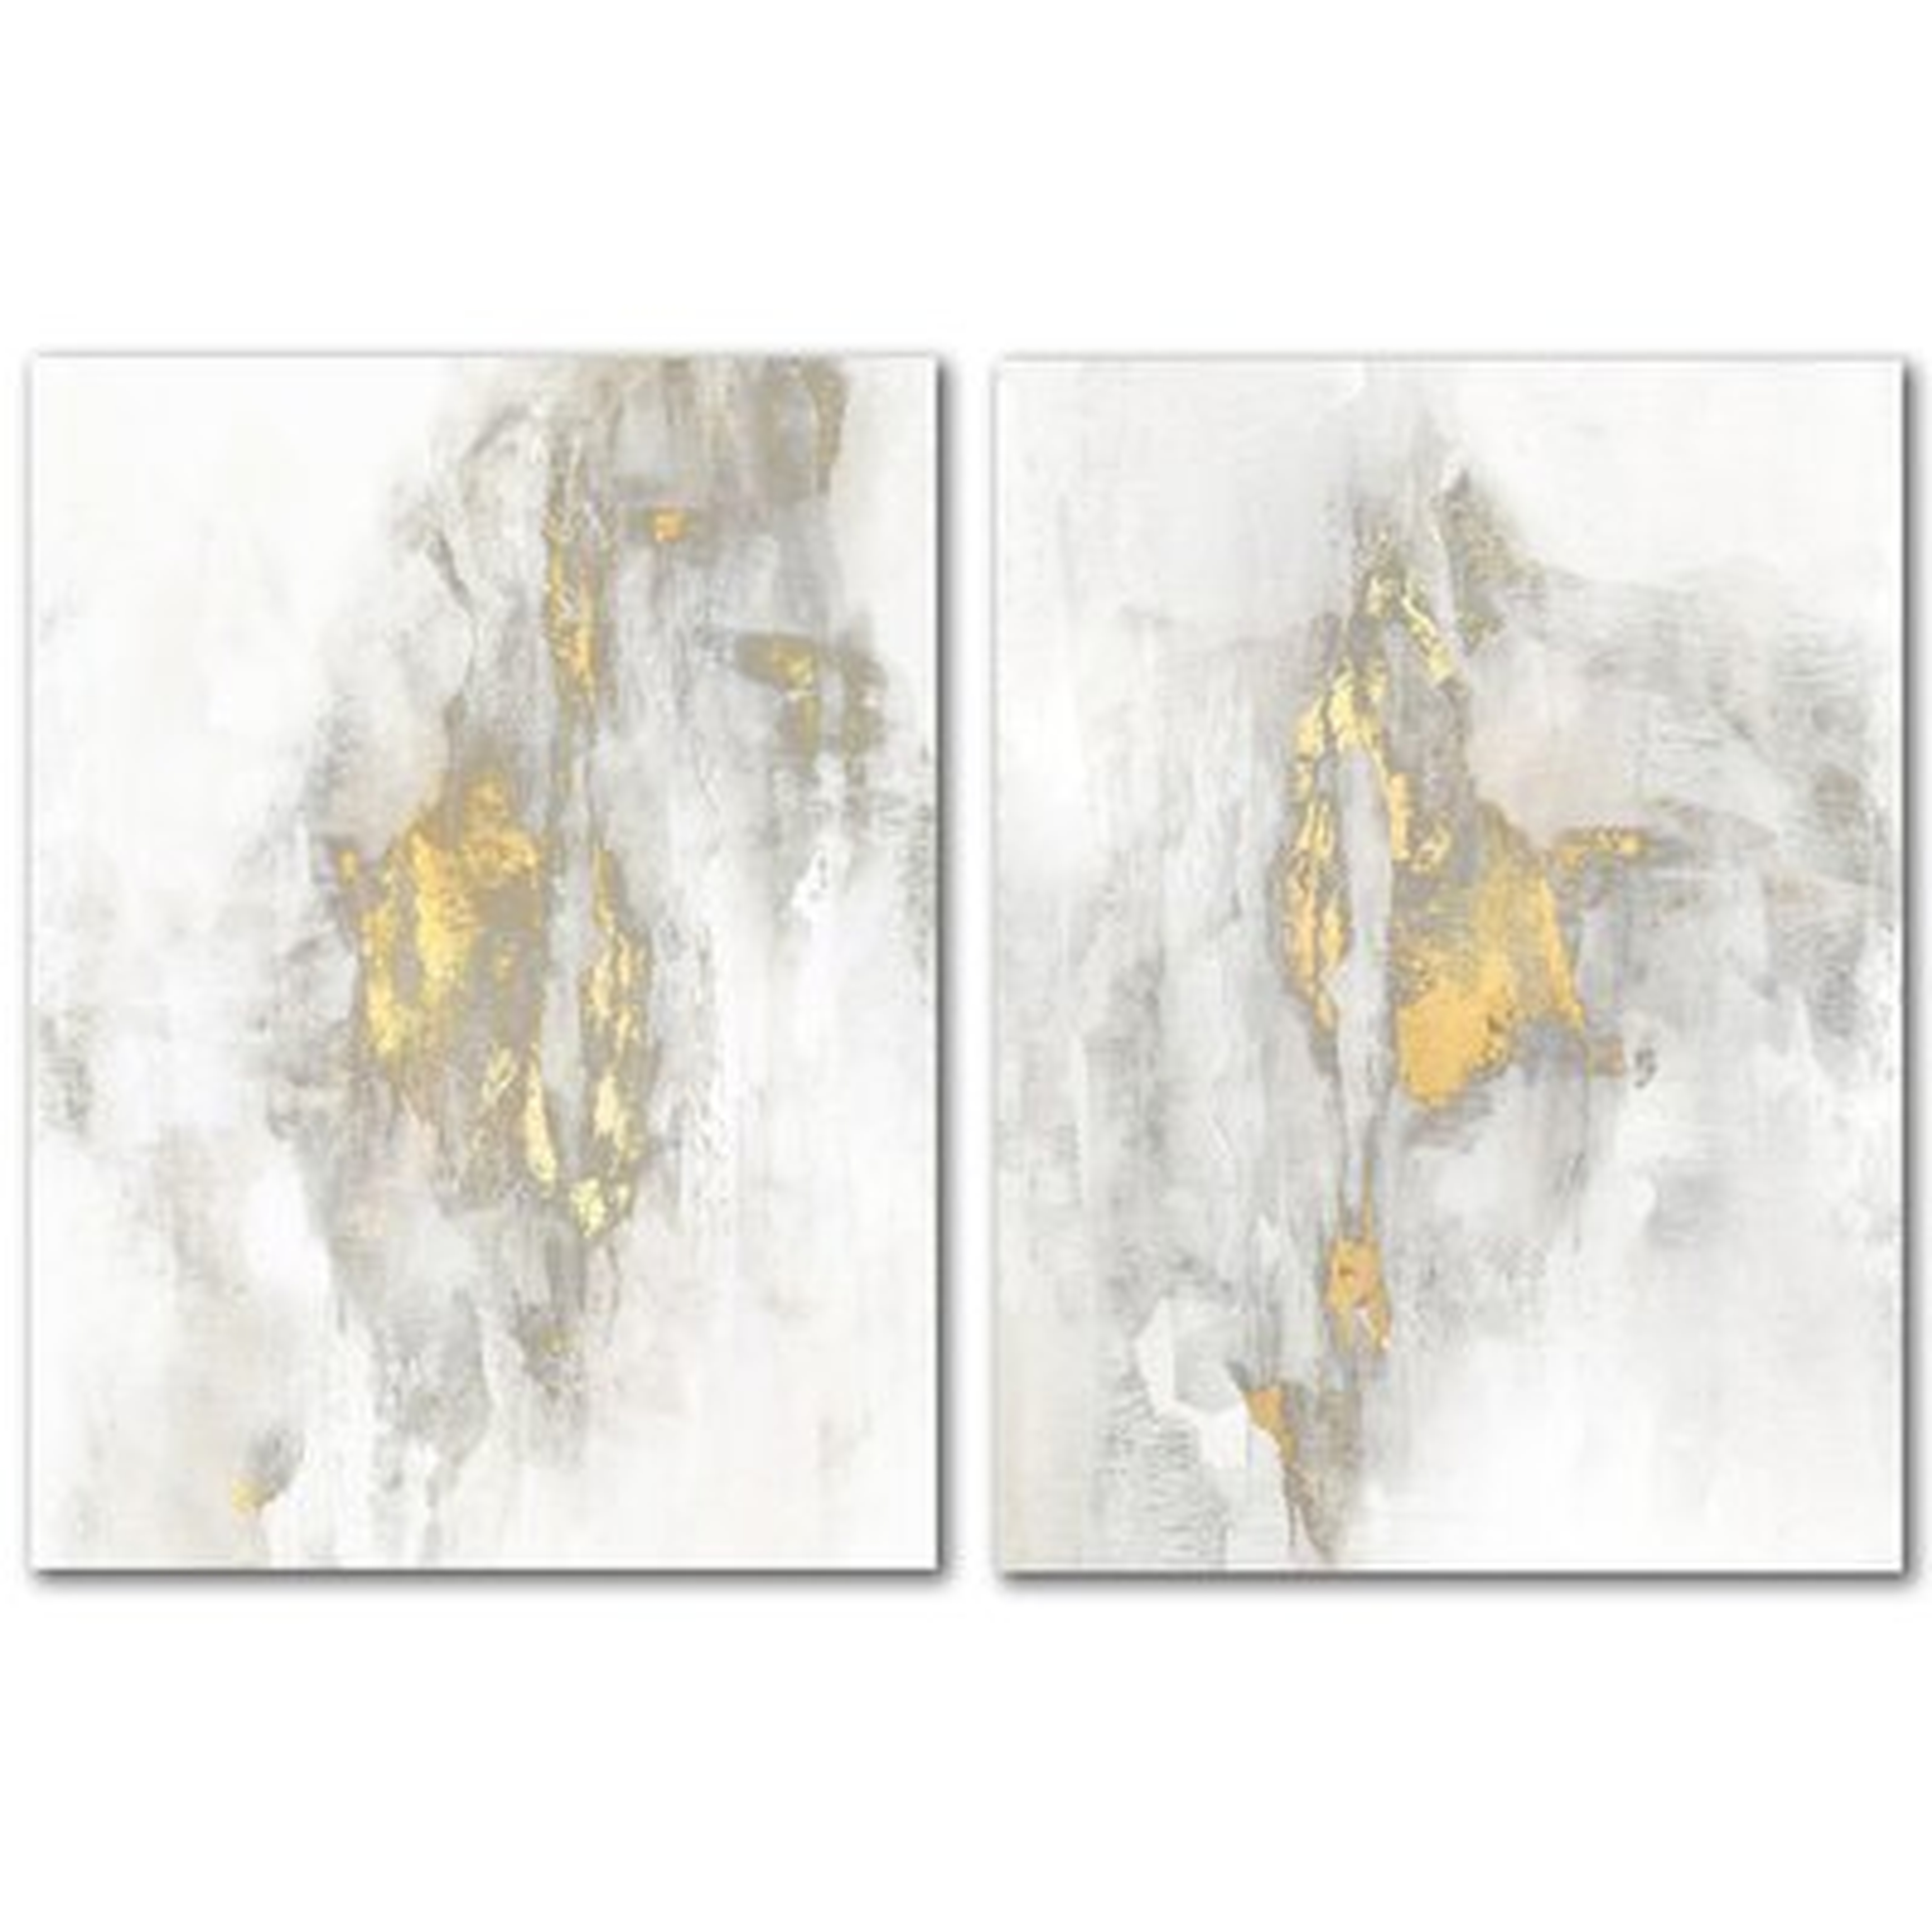 Waterfall - 2 Piece Wrapped Canvas Painting Print Set - Wayfair